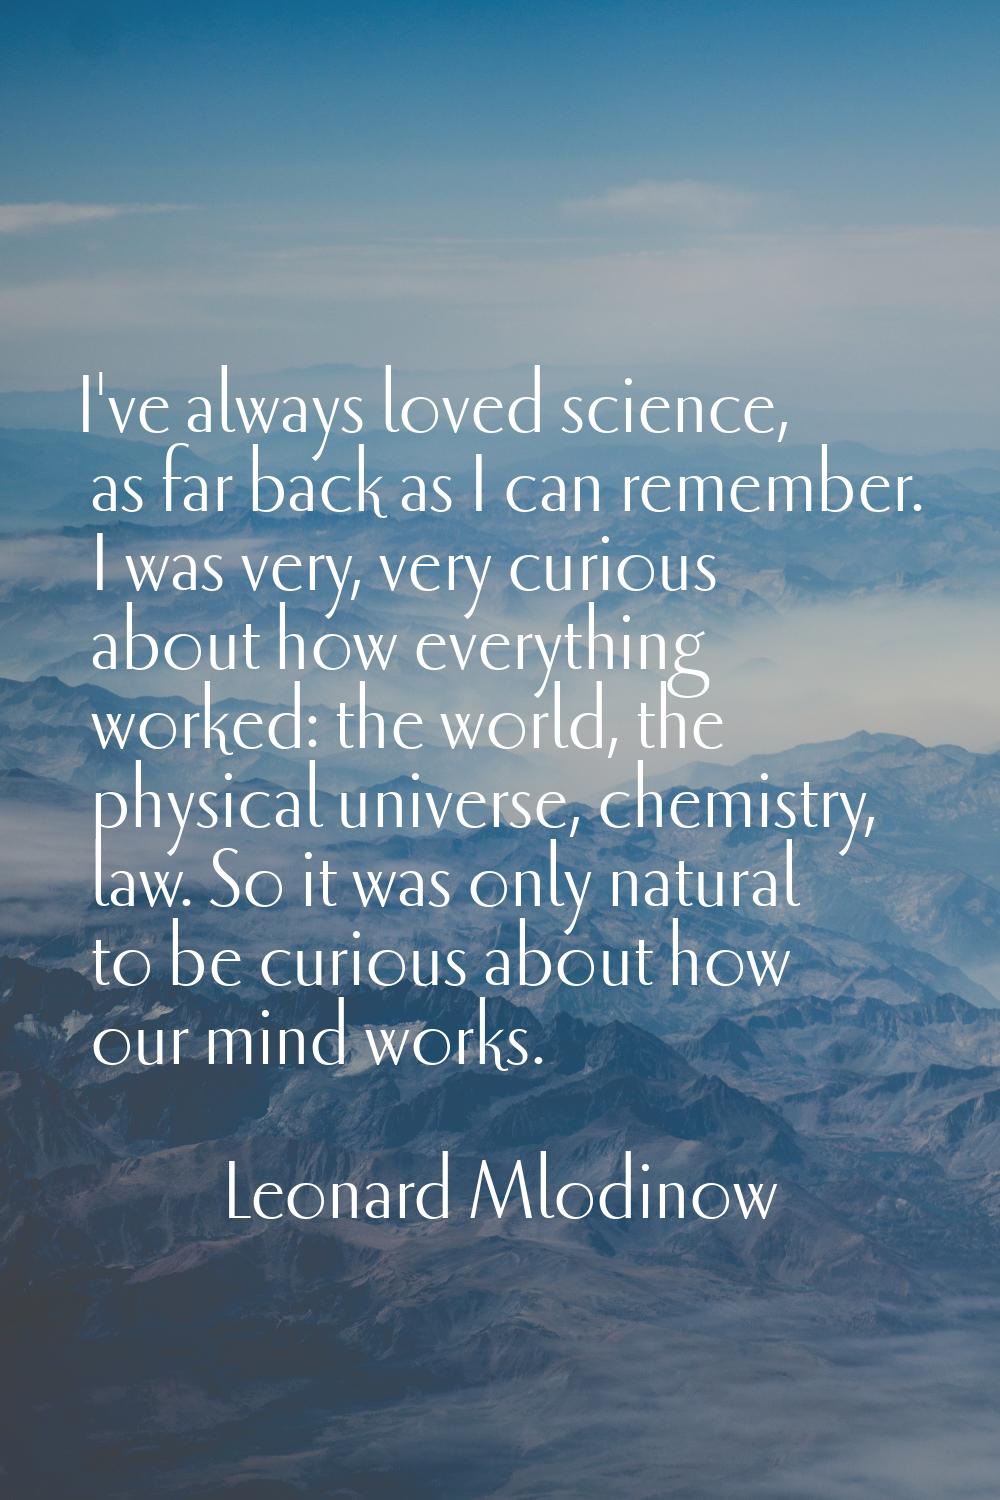 I've always loved science, as far back as I can remember. I was very, very curious about how everyt